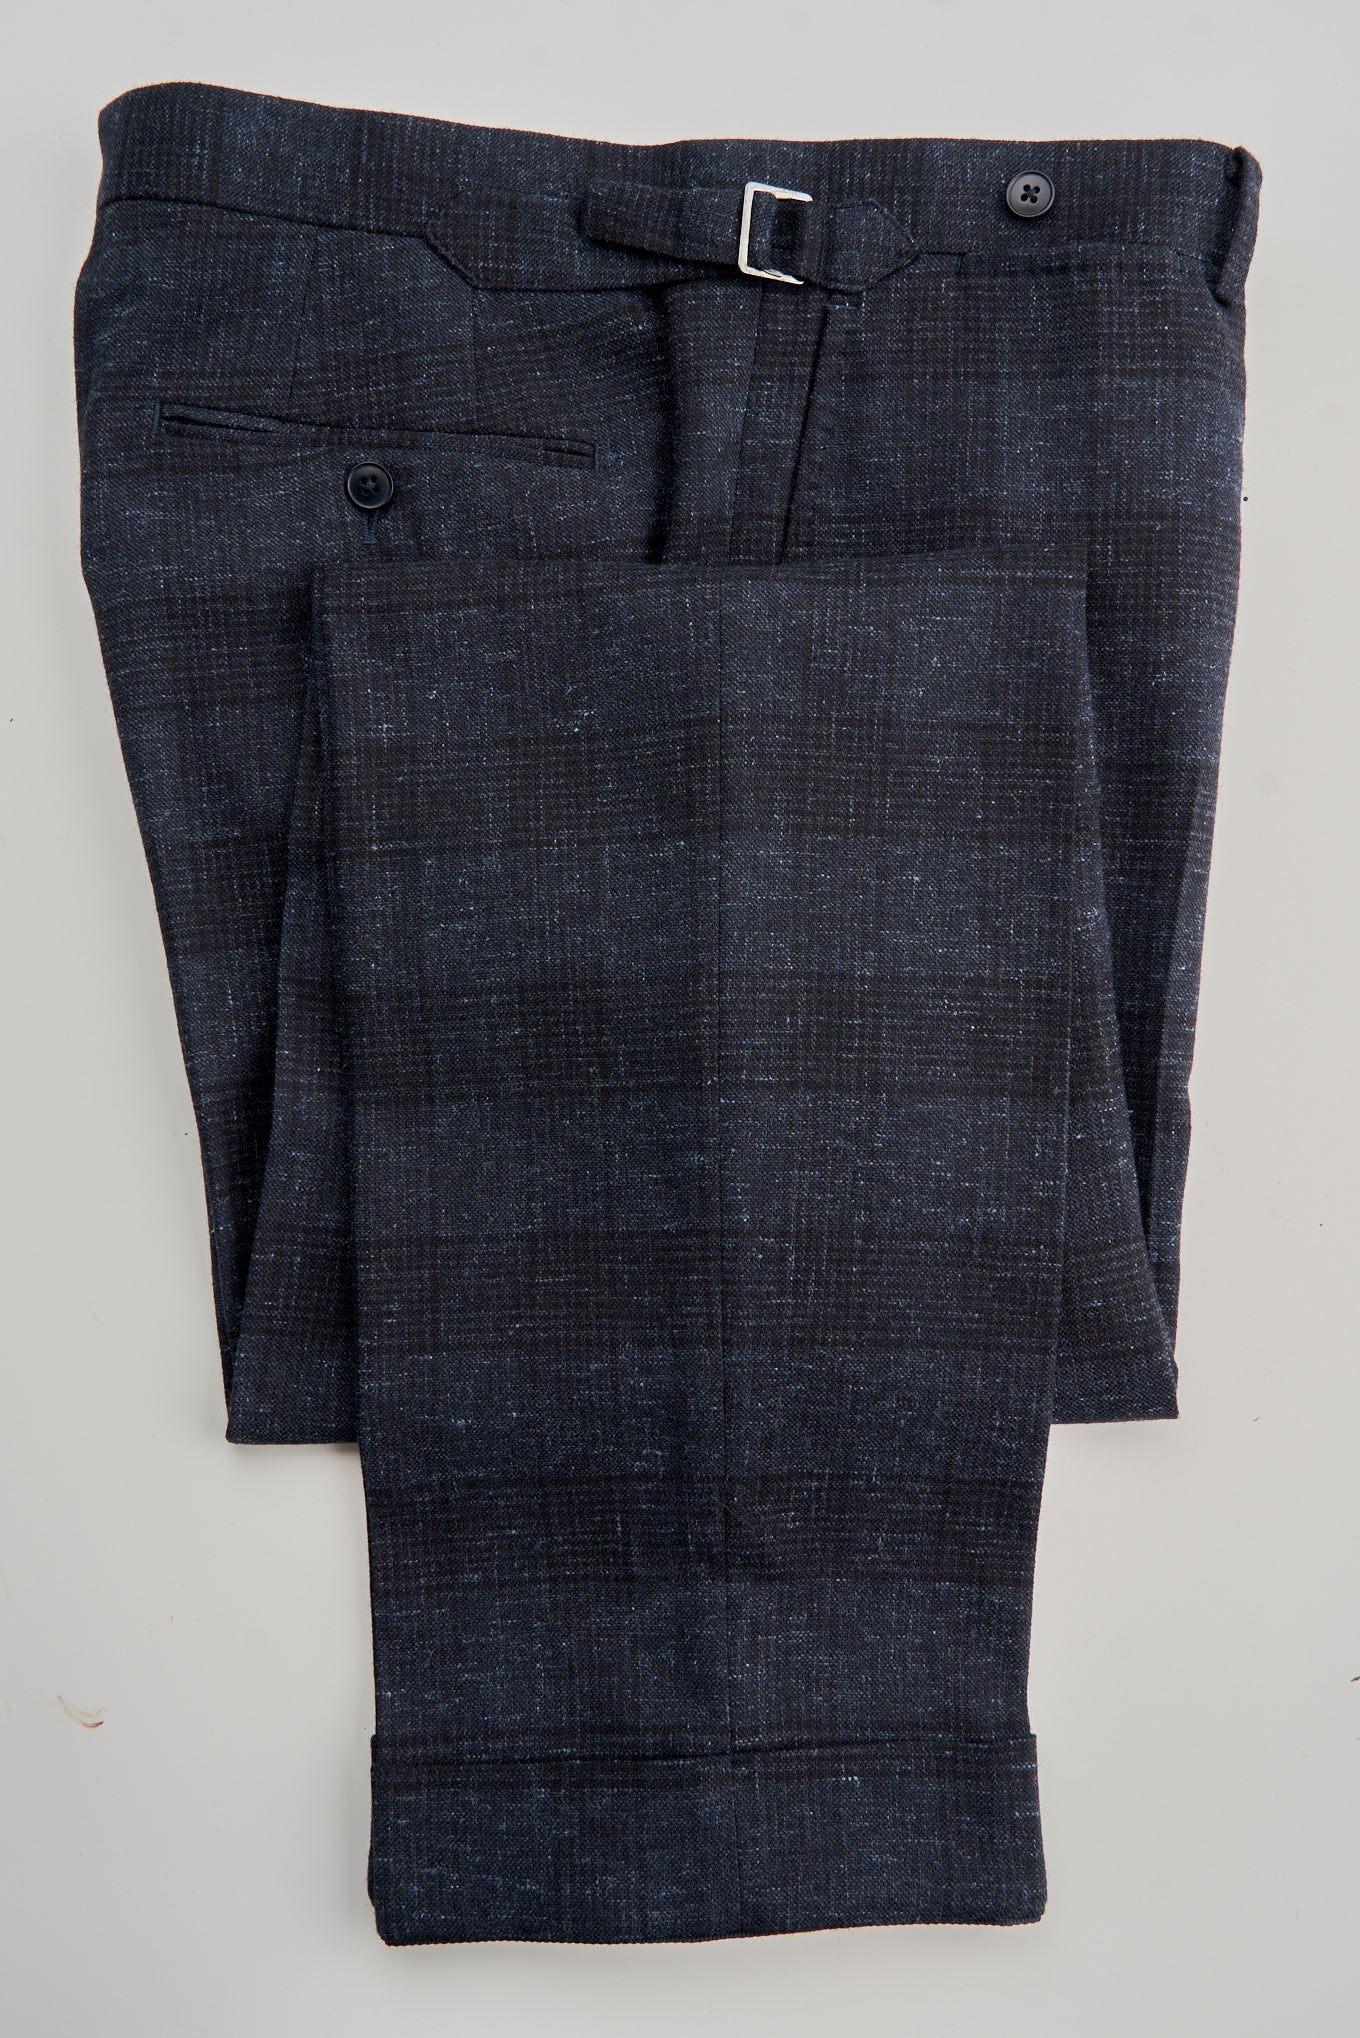 New SUITREVIEW Elmhurst Navy Check Wool/Linen Stretch Relaxed High Rise Pants - Waist Size 36 and 38